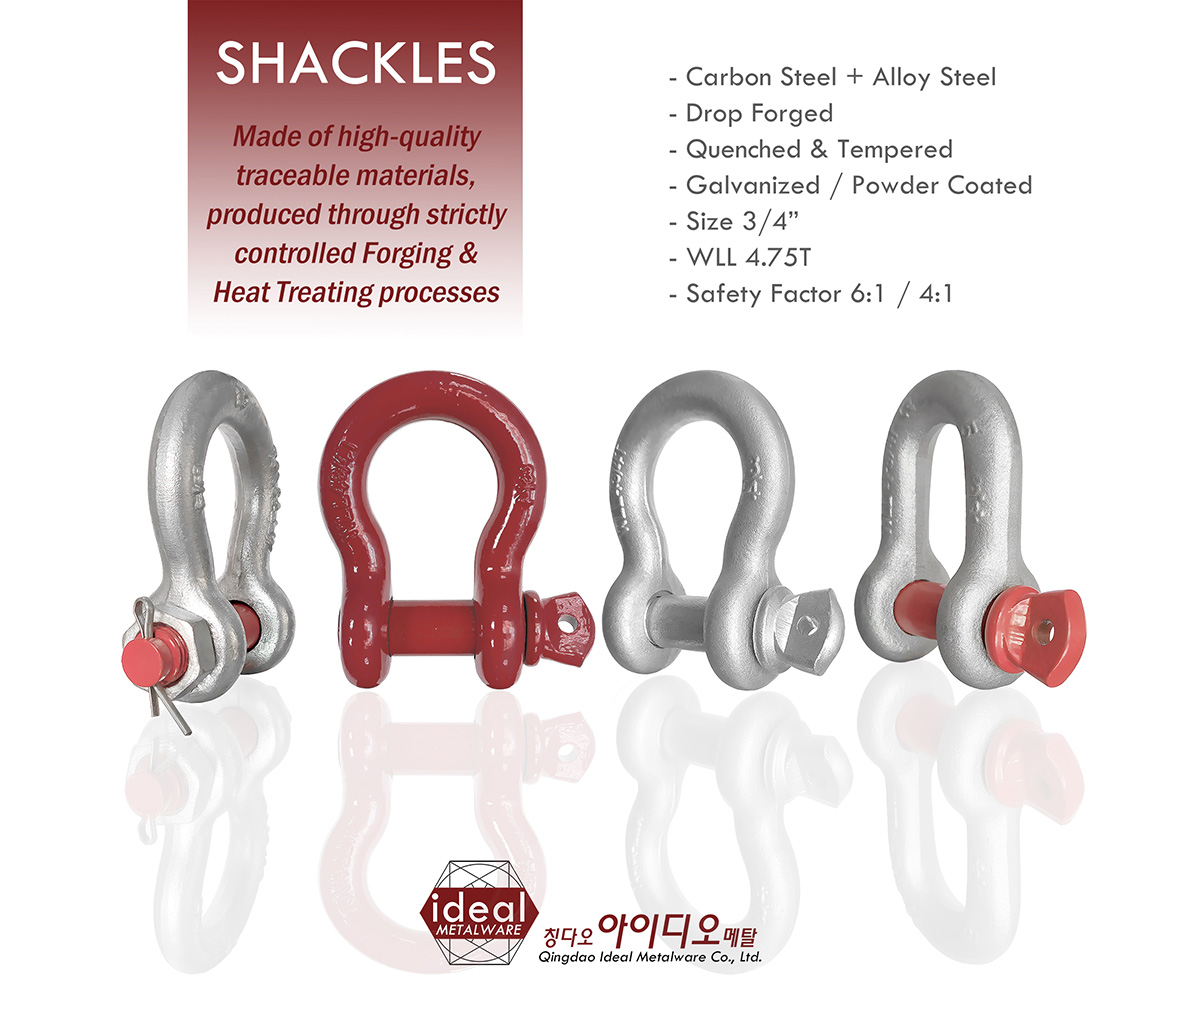 Shackles - group - combination - 小.jpg